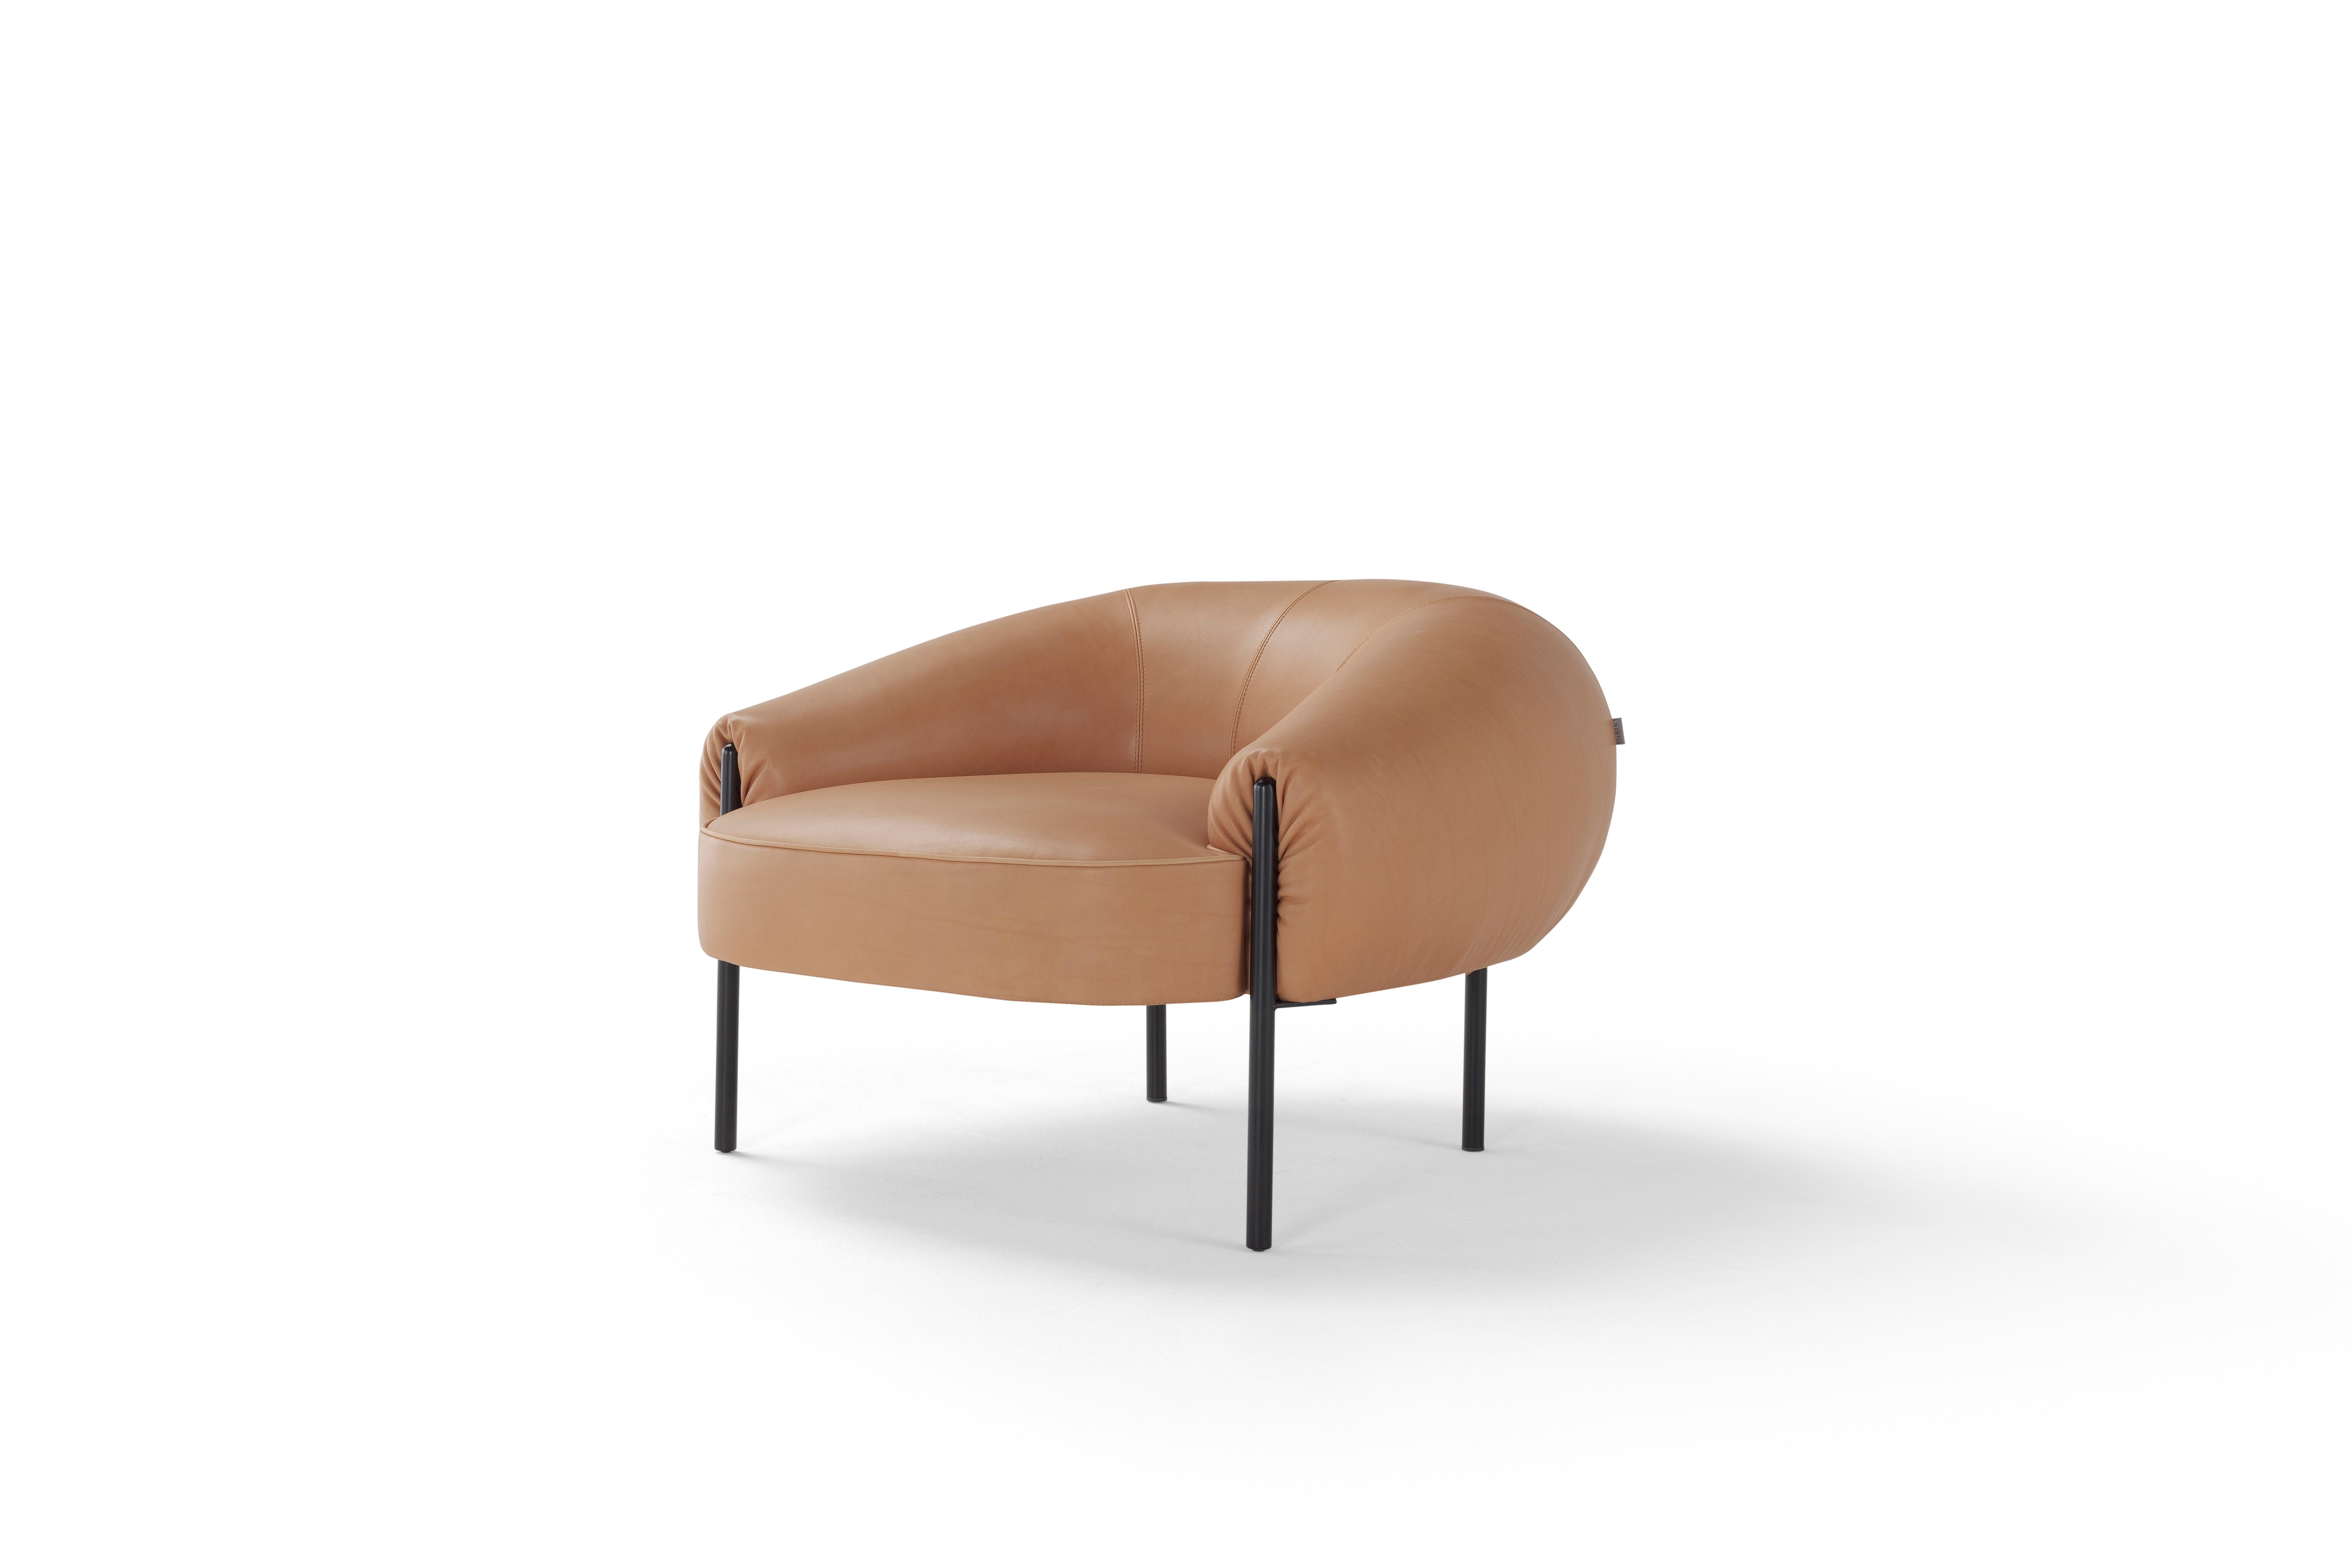 Contemporary Set 'Isola' by Amura Lab, Armchair + Ottoman, Leather Daino 01 For Sale 4